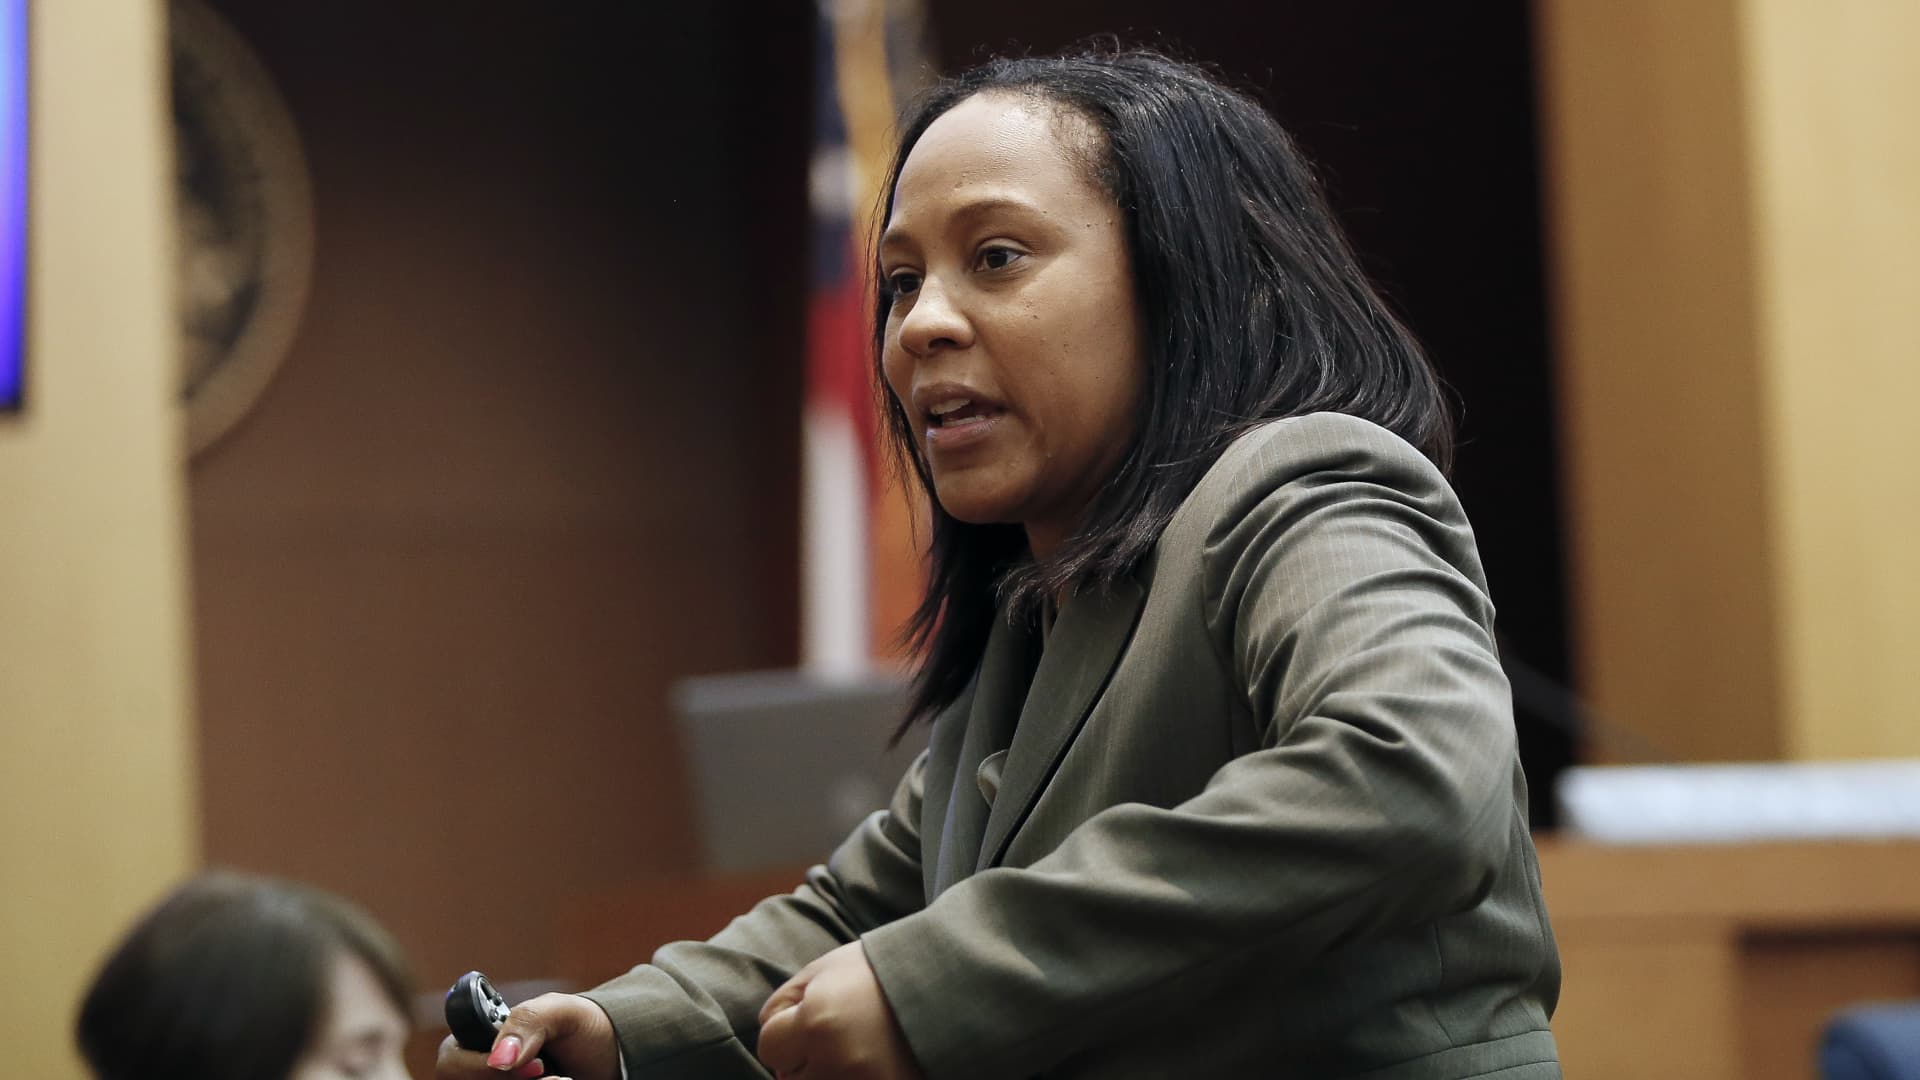 In this Wednesday, Aug. 24, 2016, file photo, Fulton County Deputy District Attorney Fani Willis makes her closing arguments during a trial in Atlanta.